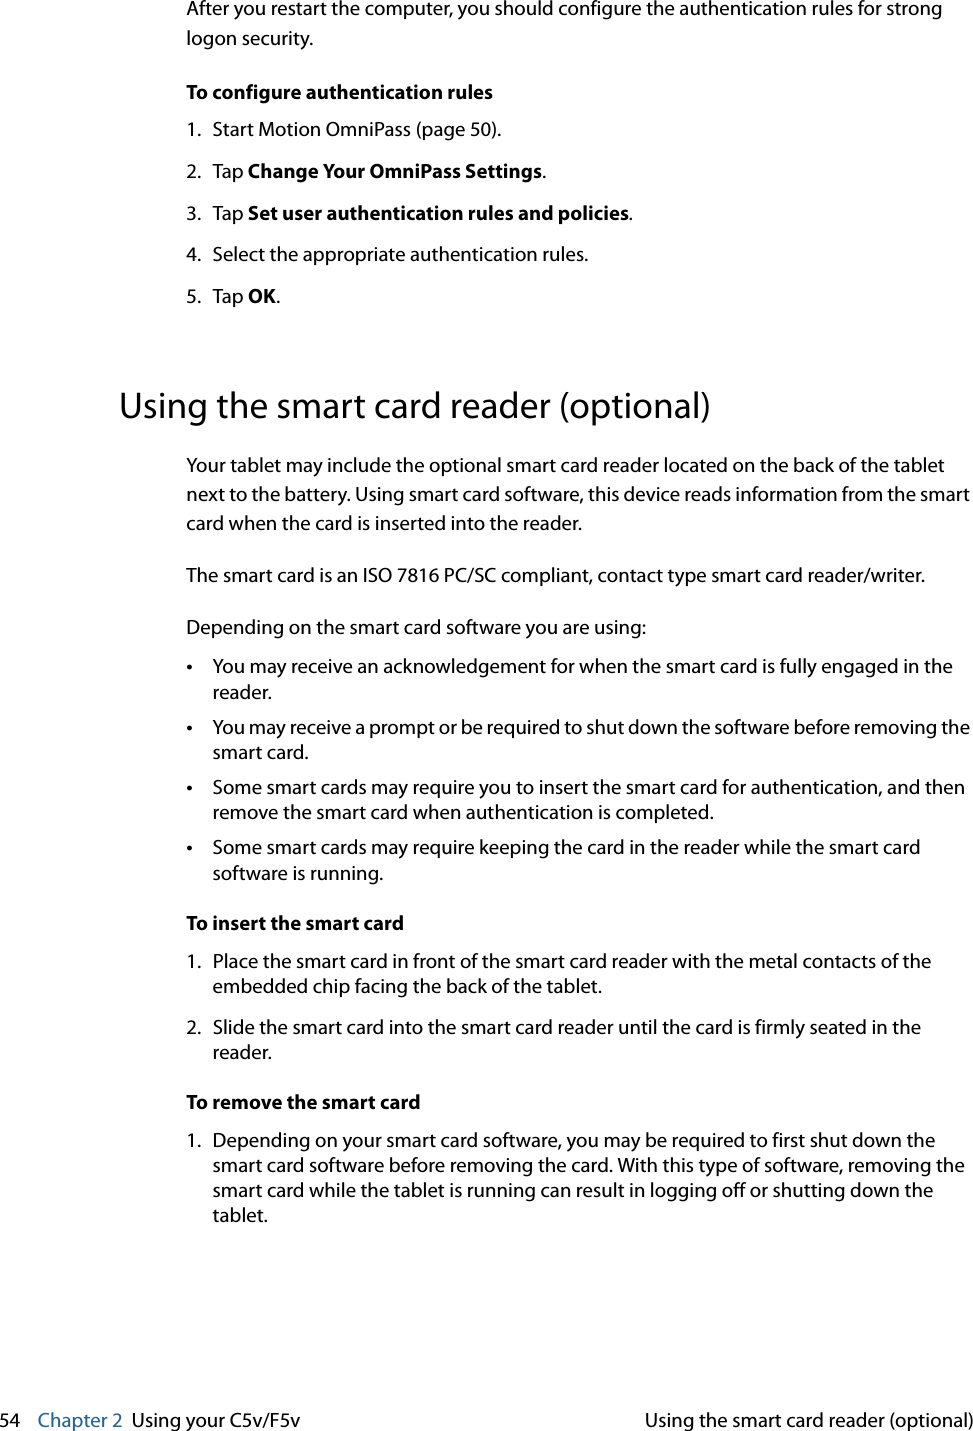 54    Chapter 2 Using your C5v/F5v Using the smart card reader (optional)After you restart the computer, you should configure the authentication rules for strong logon security.To configure authentication rules1. Start Motion OmniPass (page 50).2. Tap Change Your OmniPass Settings.3. Tap Set user authentication rules and policies.4. Select the appropriate authentication rules.5. Tap OK.Using the smart card reader (optional)Your tablet may include the optional smart card reader located on the back of the tablet next to the battery. Using smart card software, this device reads information from the smart card when the card is inserted into the reader. The smart card is an ISO 7816 PC/SC compliant, contact type smart card reader/writer.Depending on the smart card software you are using:•You may receive an acknowledgement for when the smart card is fully engaged in the reader.•You may receive a prompt or be required to shut down the software before removing the smart card.•Some smart cards may require you to insert the smart card for authentication, and then remove the smart card when authentication is completed.•Some smart cards may require keeping the card in the reader while the smart card software is running.To insert the smart card1. Place the smart card in front of the smart card reader with the metal contacts of the embedded chip facing the back of the tablet.2. Slide the smart card into the smart card reader until the card is firmly seated in the reader.To remove the smart card1. Depending on your smart card software, you may be required to first shut down the smart card software before removing the card. With this type of software, removing the smart card while the tablet is running can result in logging off or shutting down the tablet.